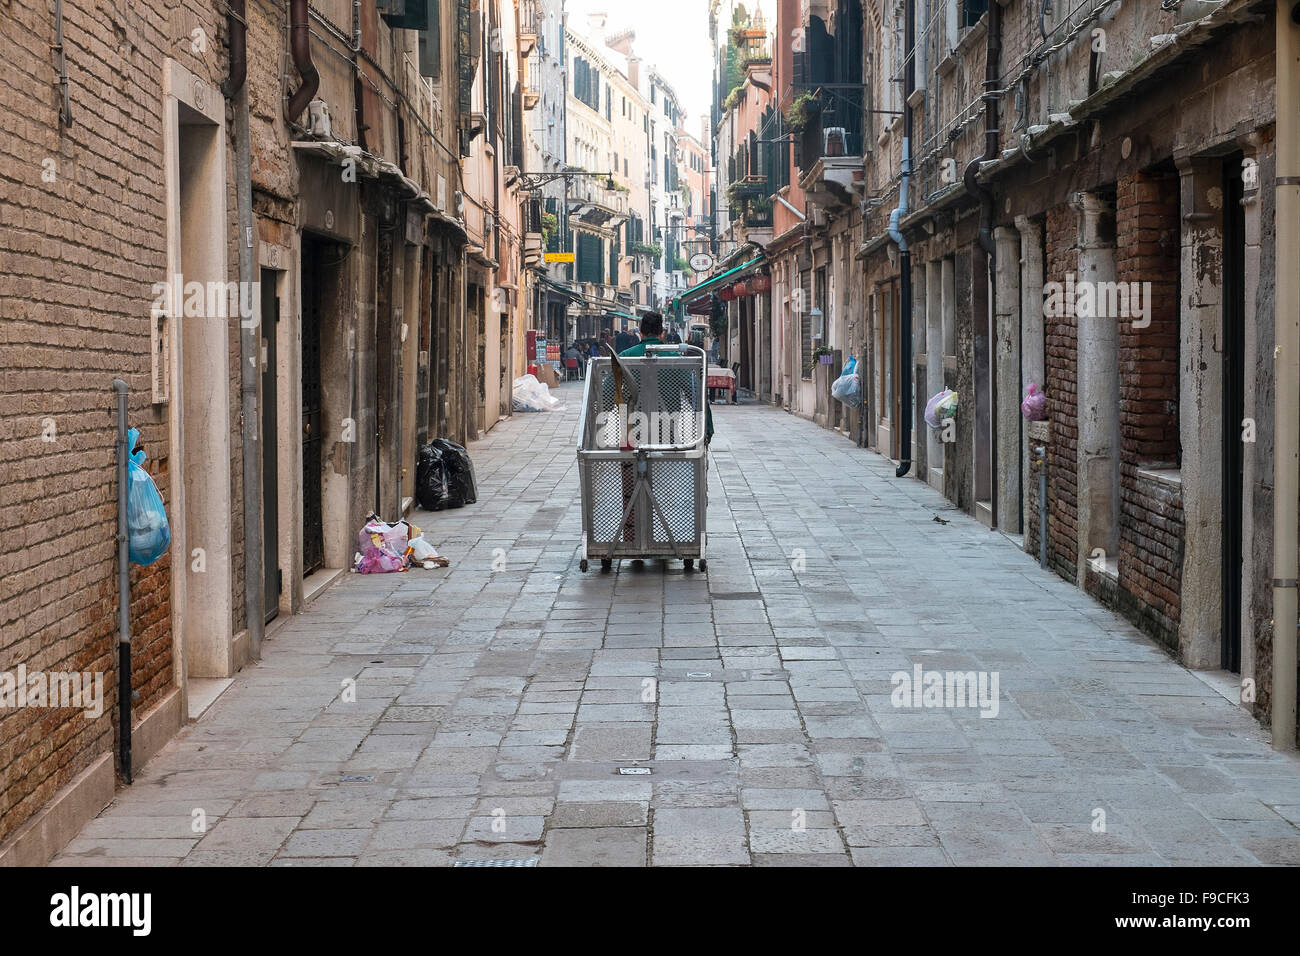 dustman in the streets of Venice Stock Photo